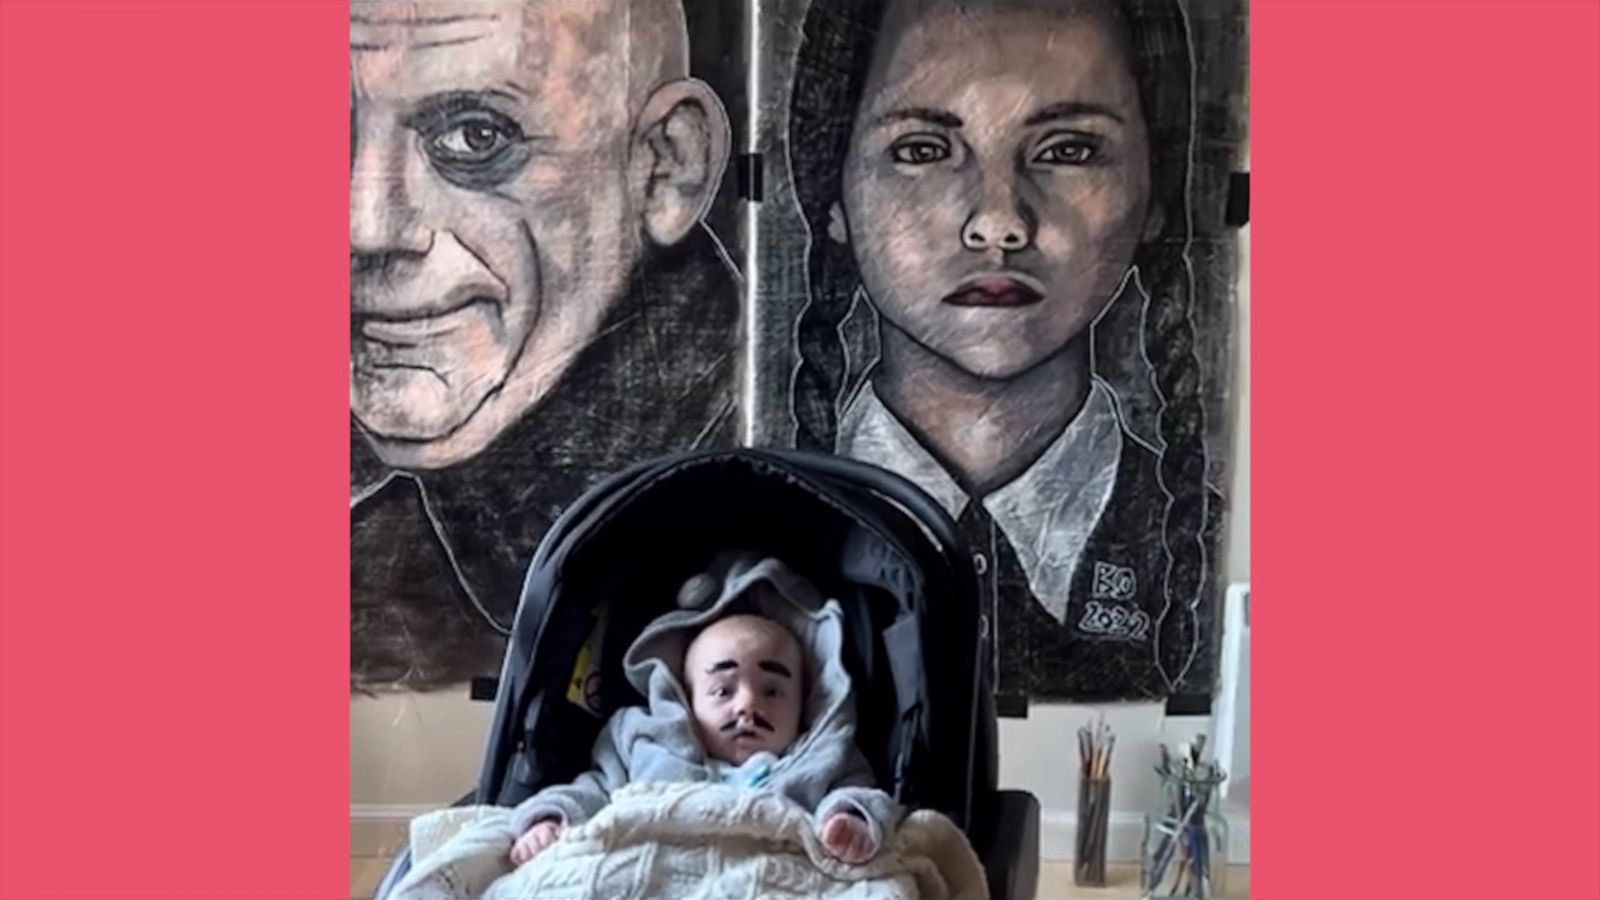 VIDEO: Baby poses in front of 'Addams Family' art exhibit